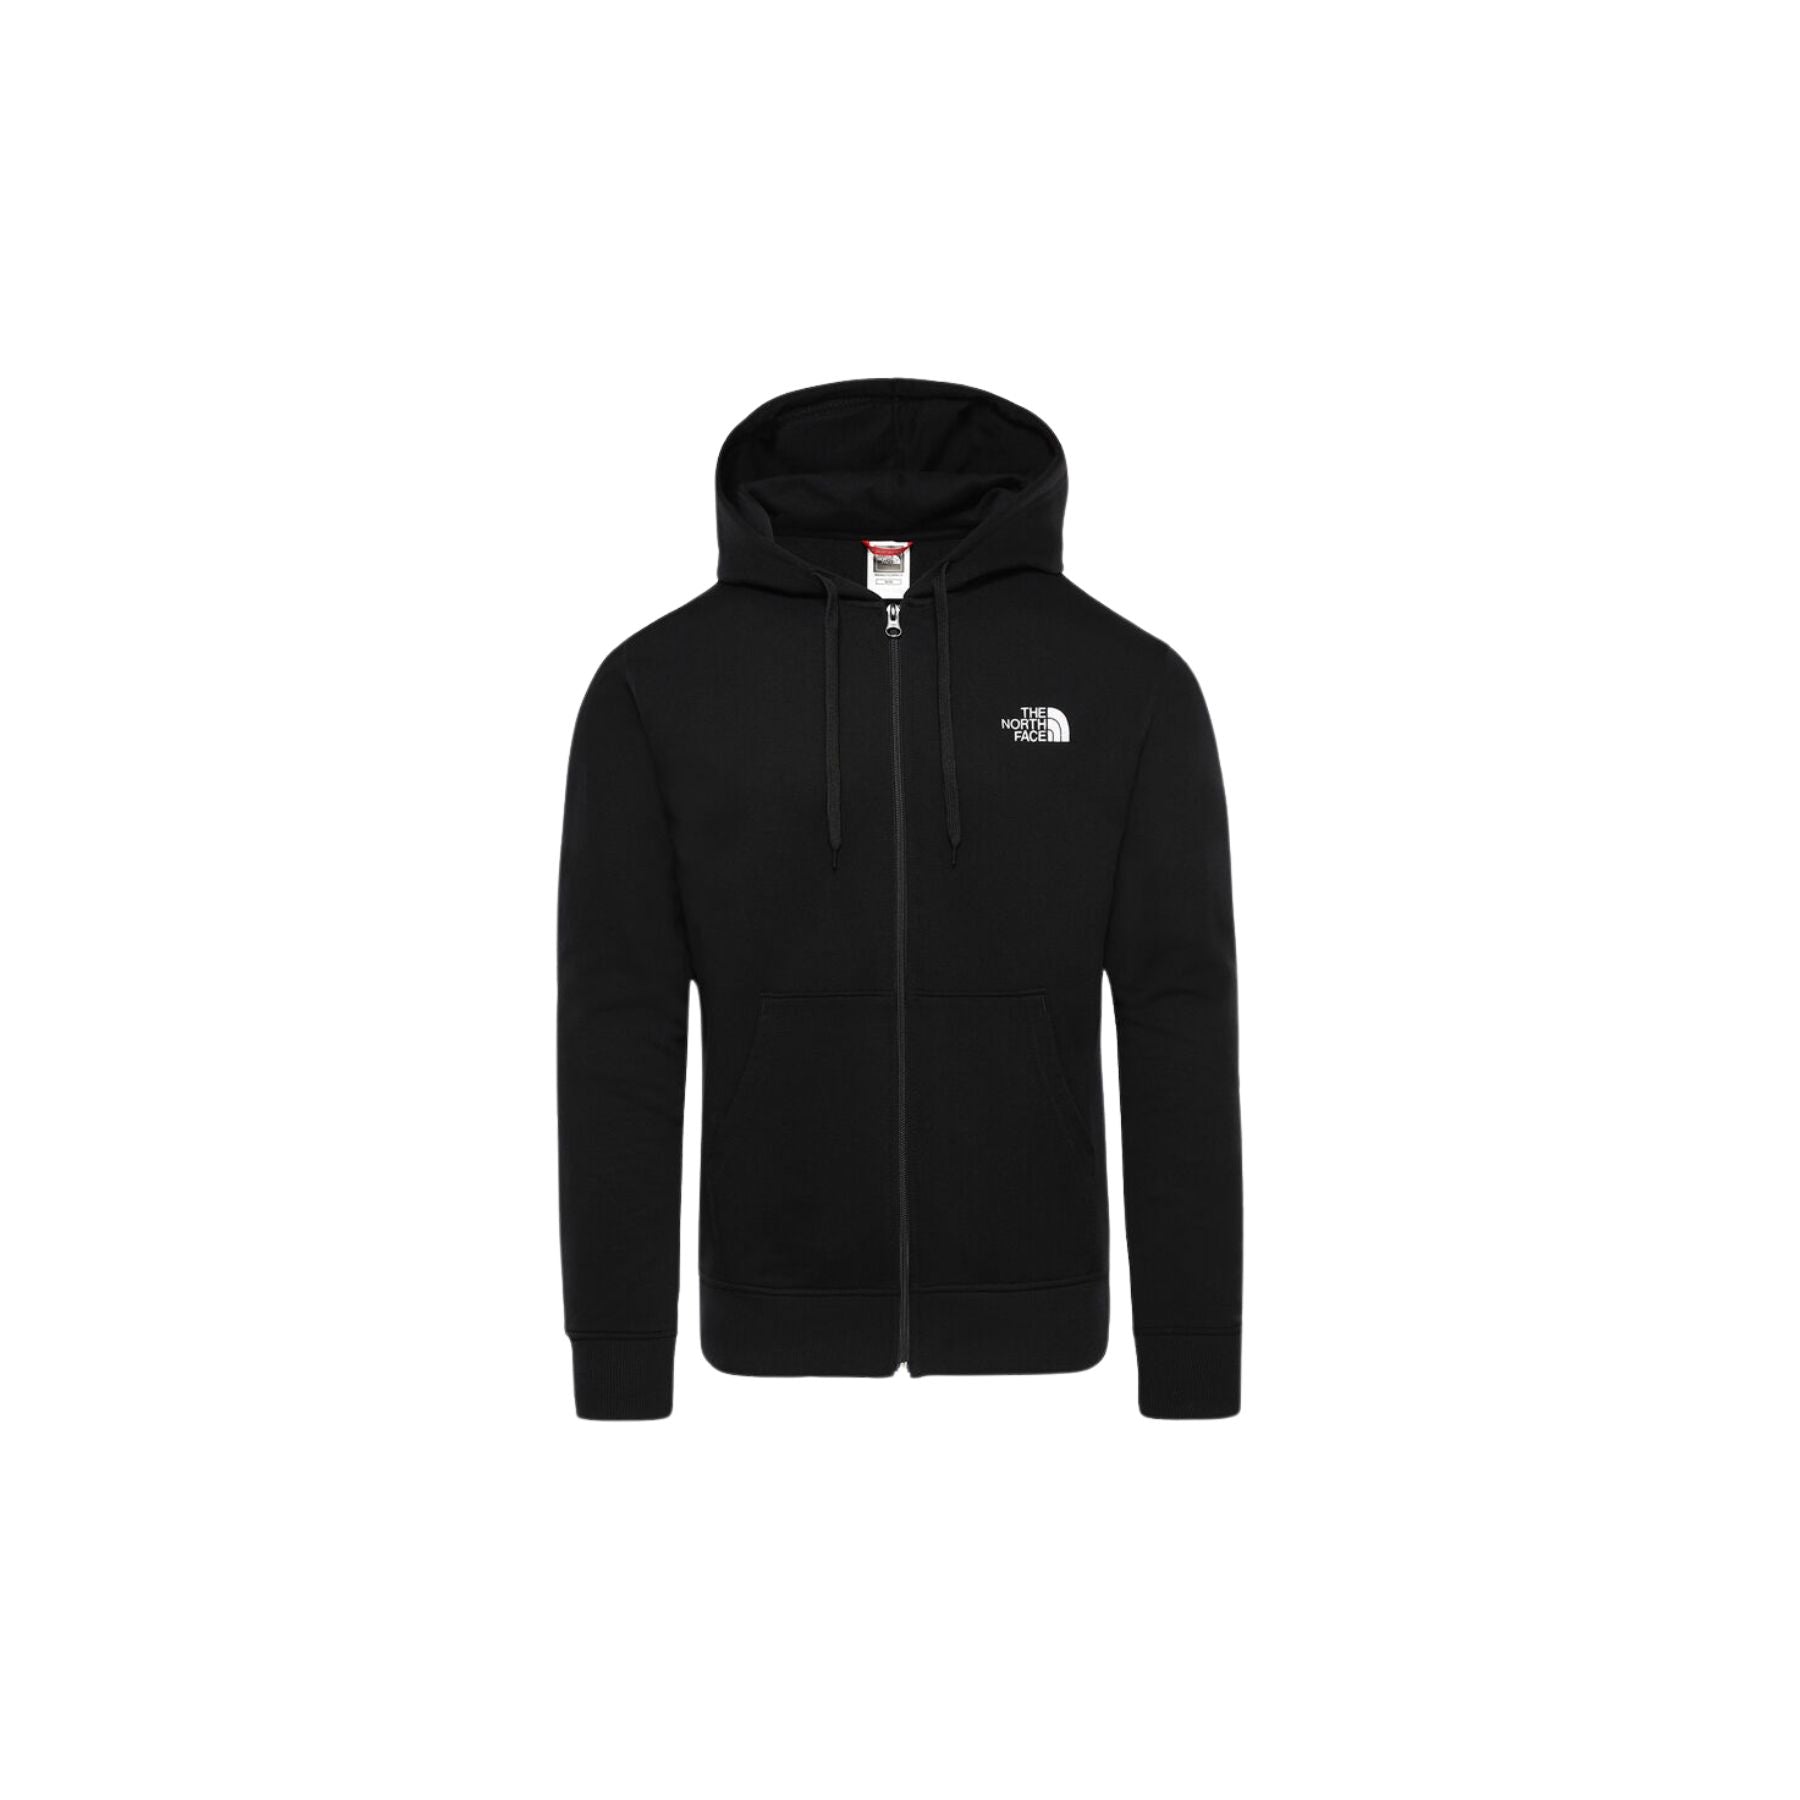 THE NORTH FACE OPEN GATE FZ HOOD